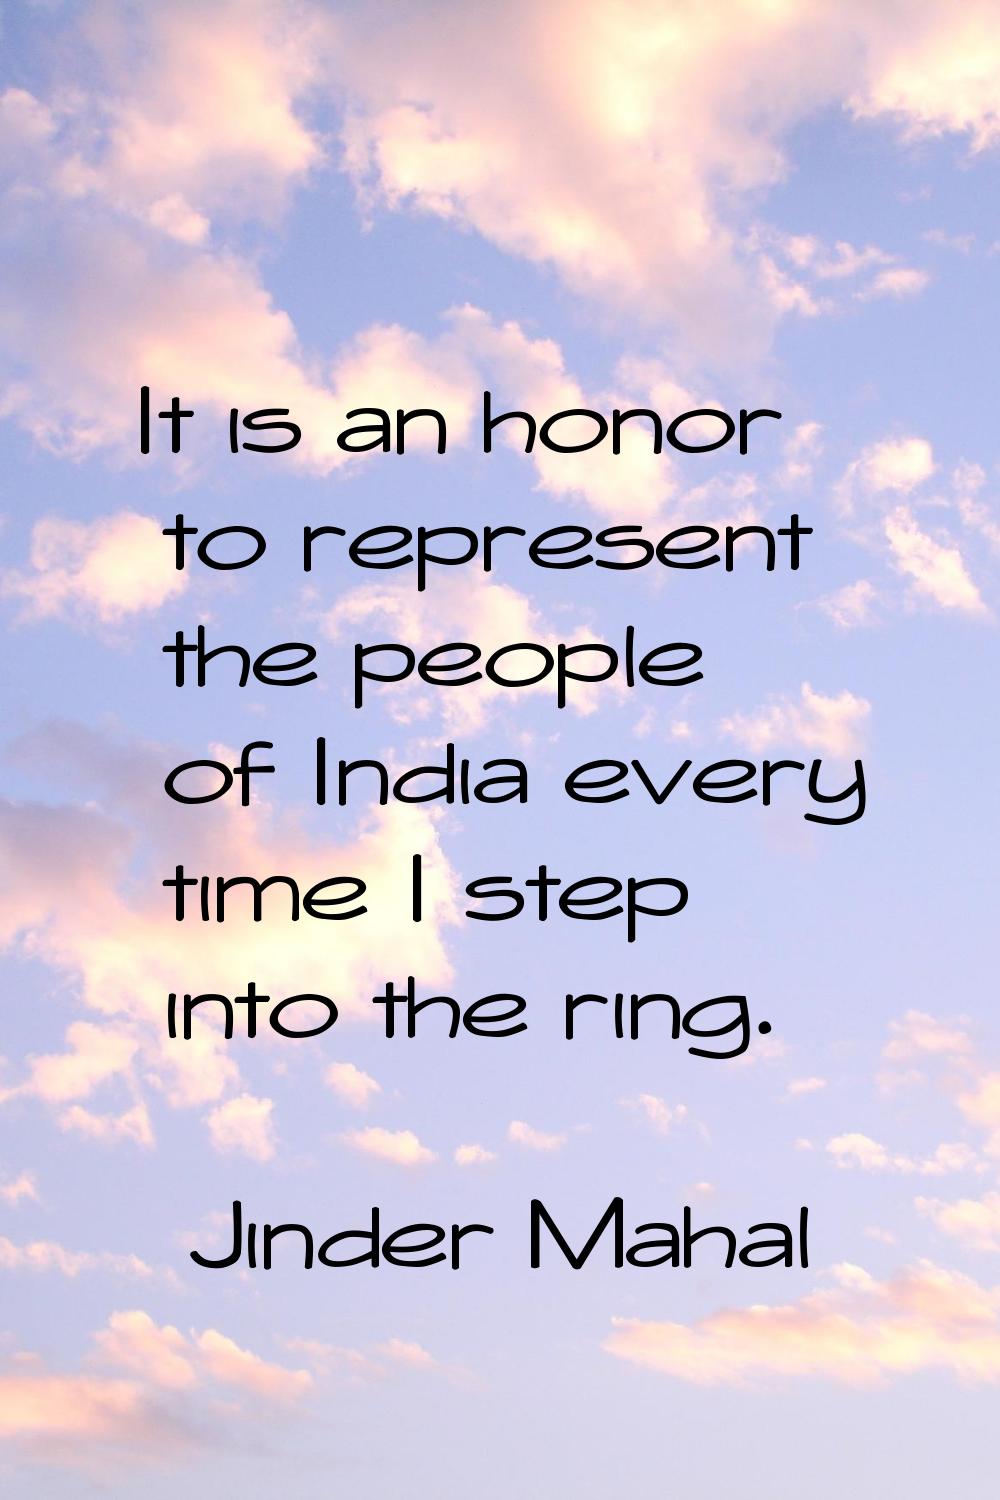 It is an honor to represent the people of India every time I step into the ring.